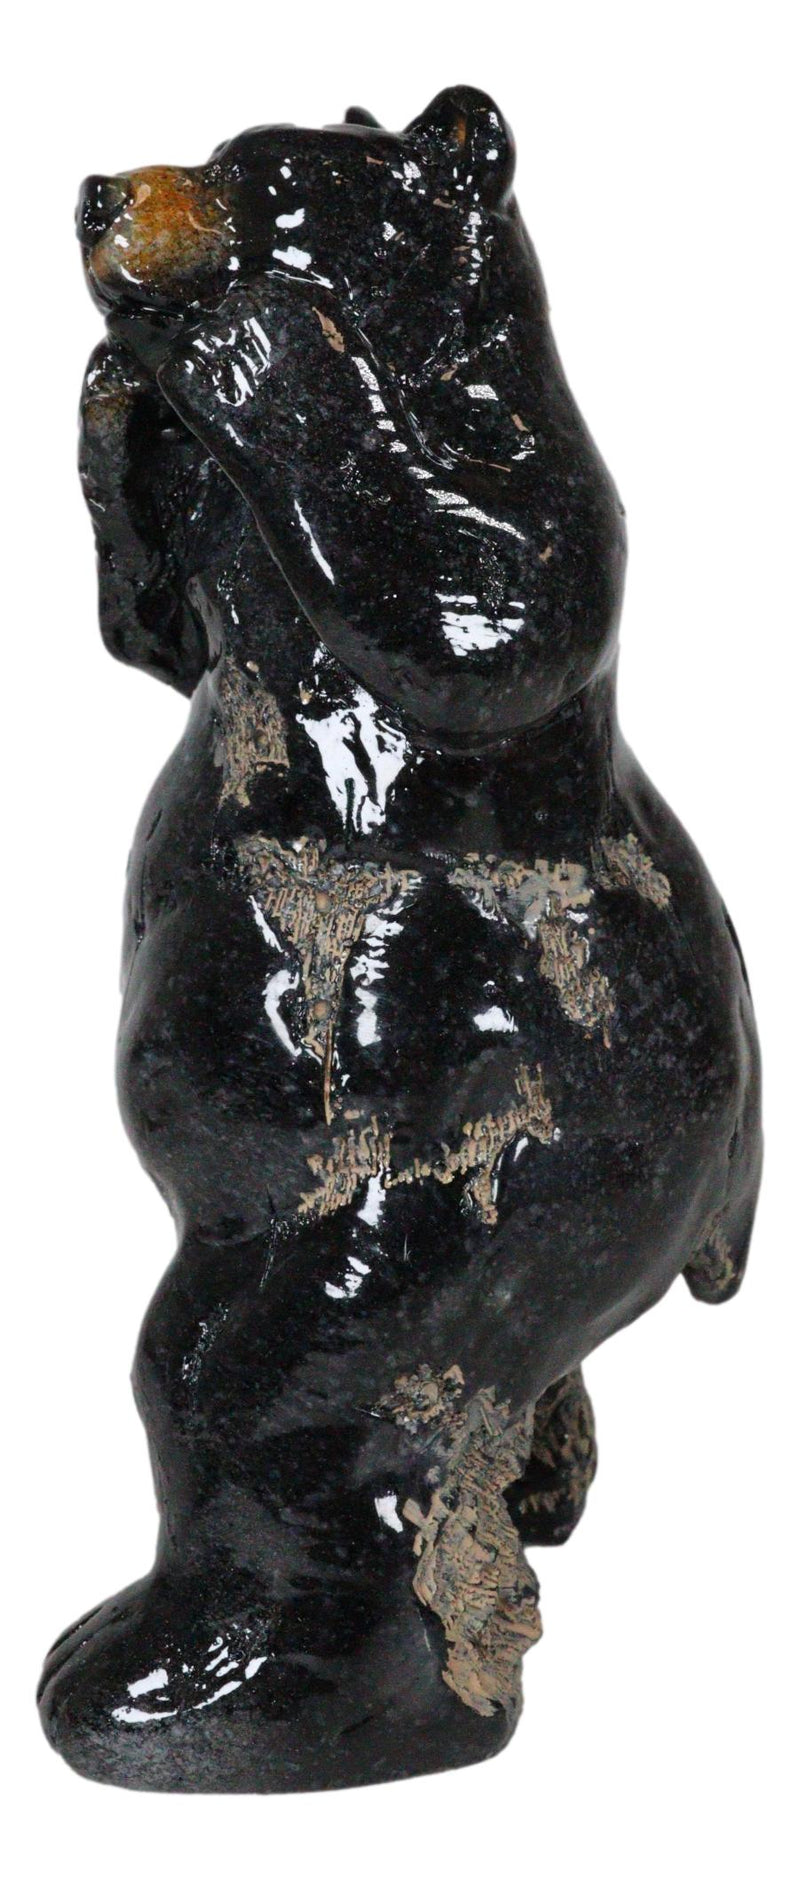 Rustic Western Woodlands Forest Black Bear South Paw Boxing Decorative Figurine